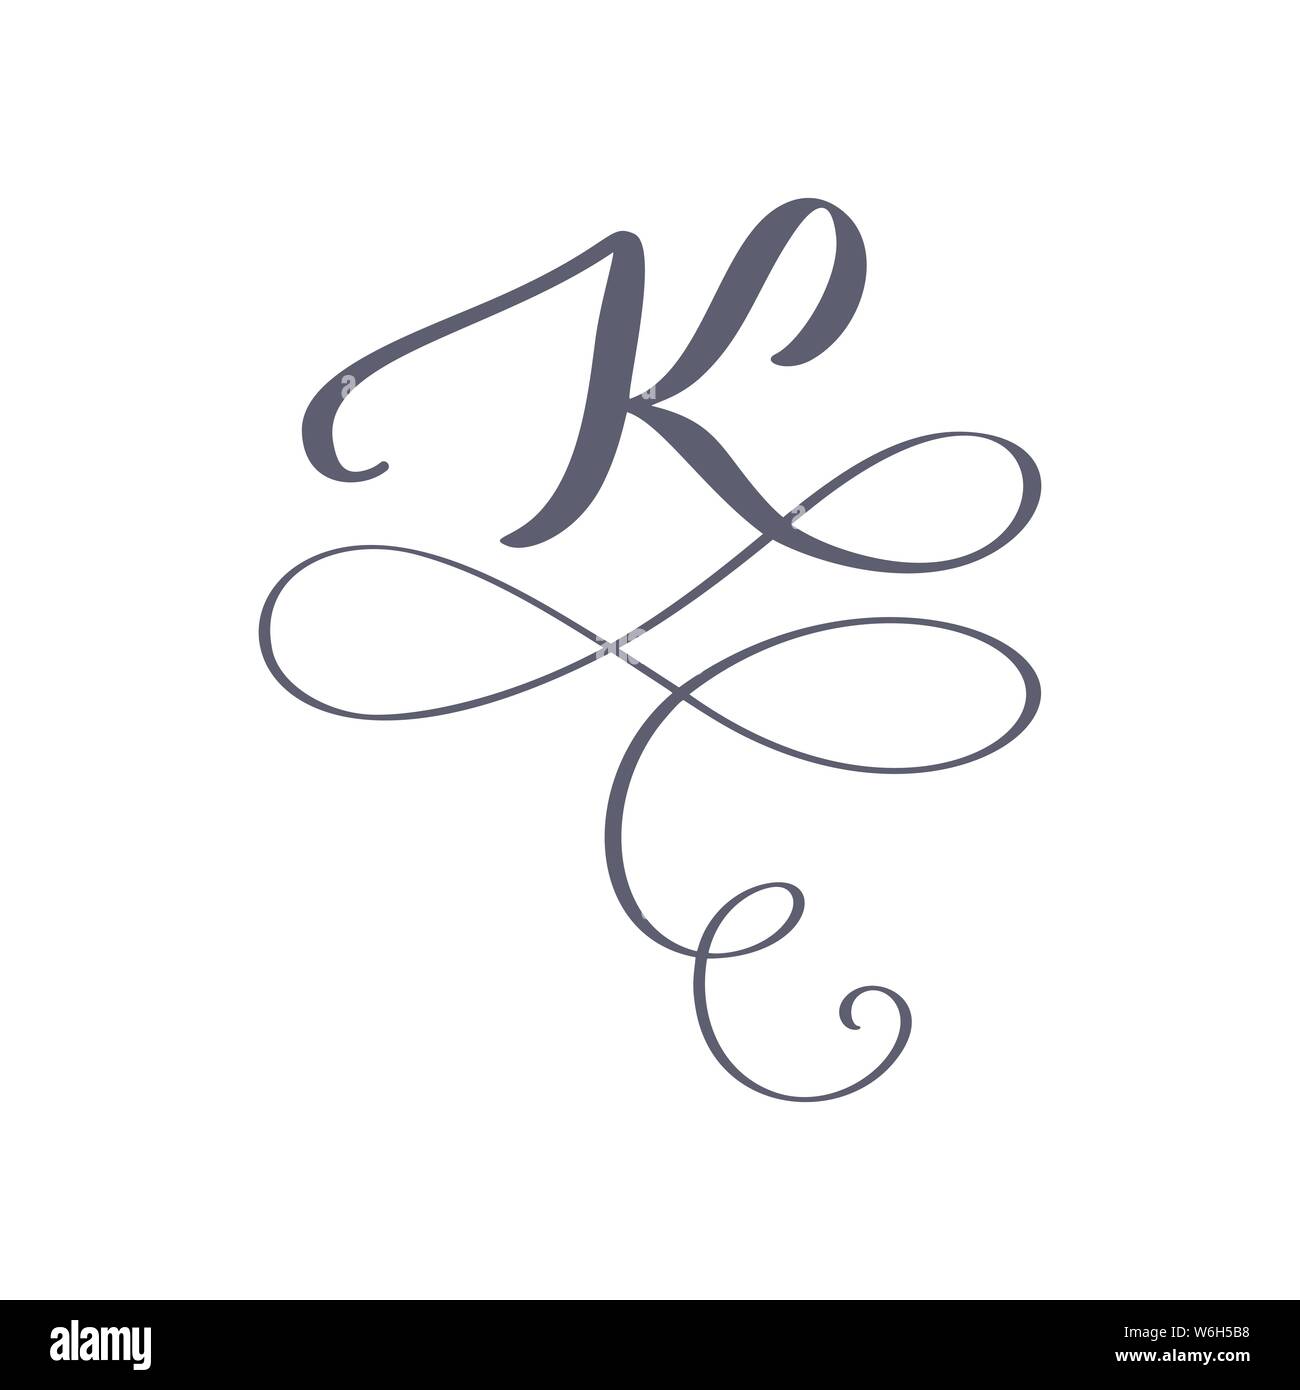 Elegant dynamic letter k with wing linear design can be used for tattoo  any transportation service or in sports areas  CanStock